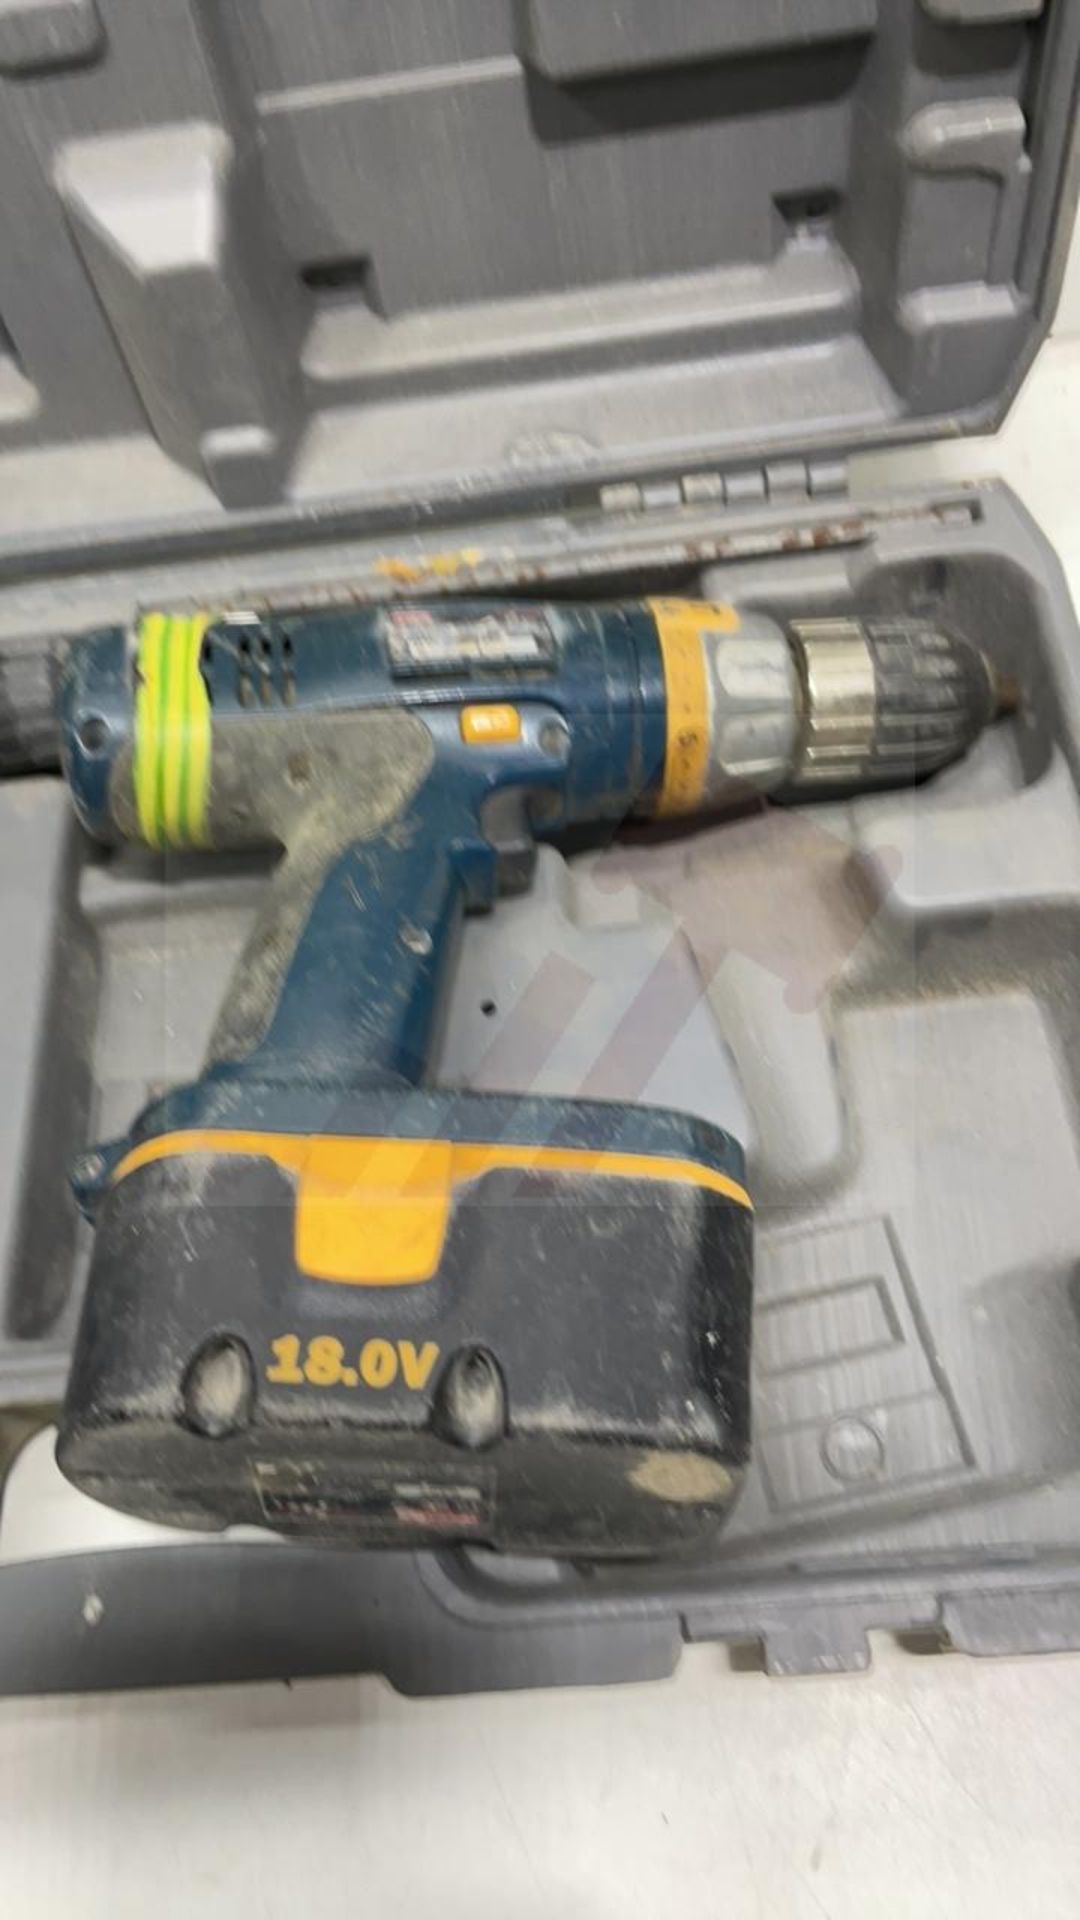 Ryobi CDI 1801 18 V Hammer Drill CCD 1801 Driver & Case | 1 battery only - Image 6 of 8